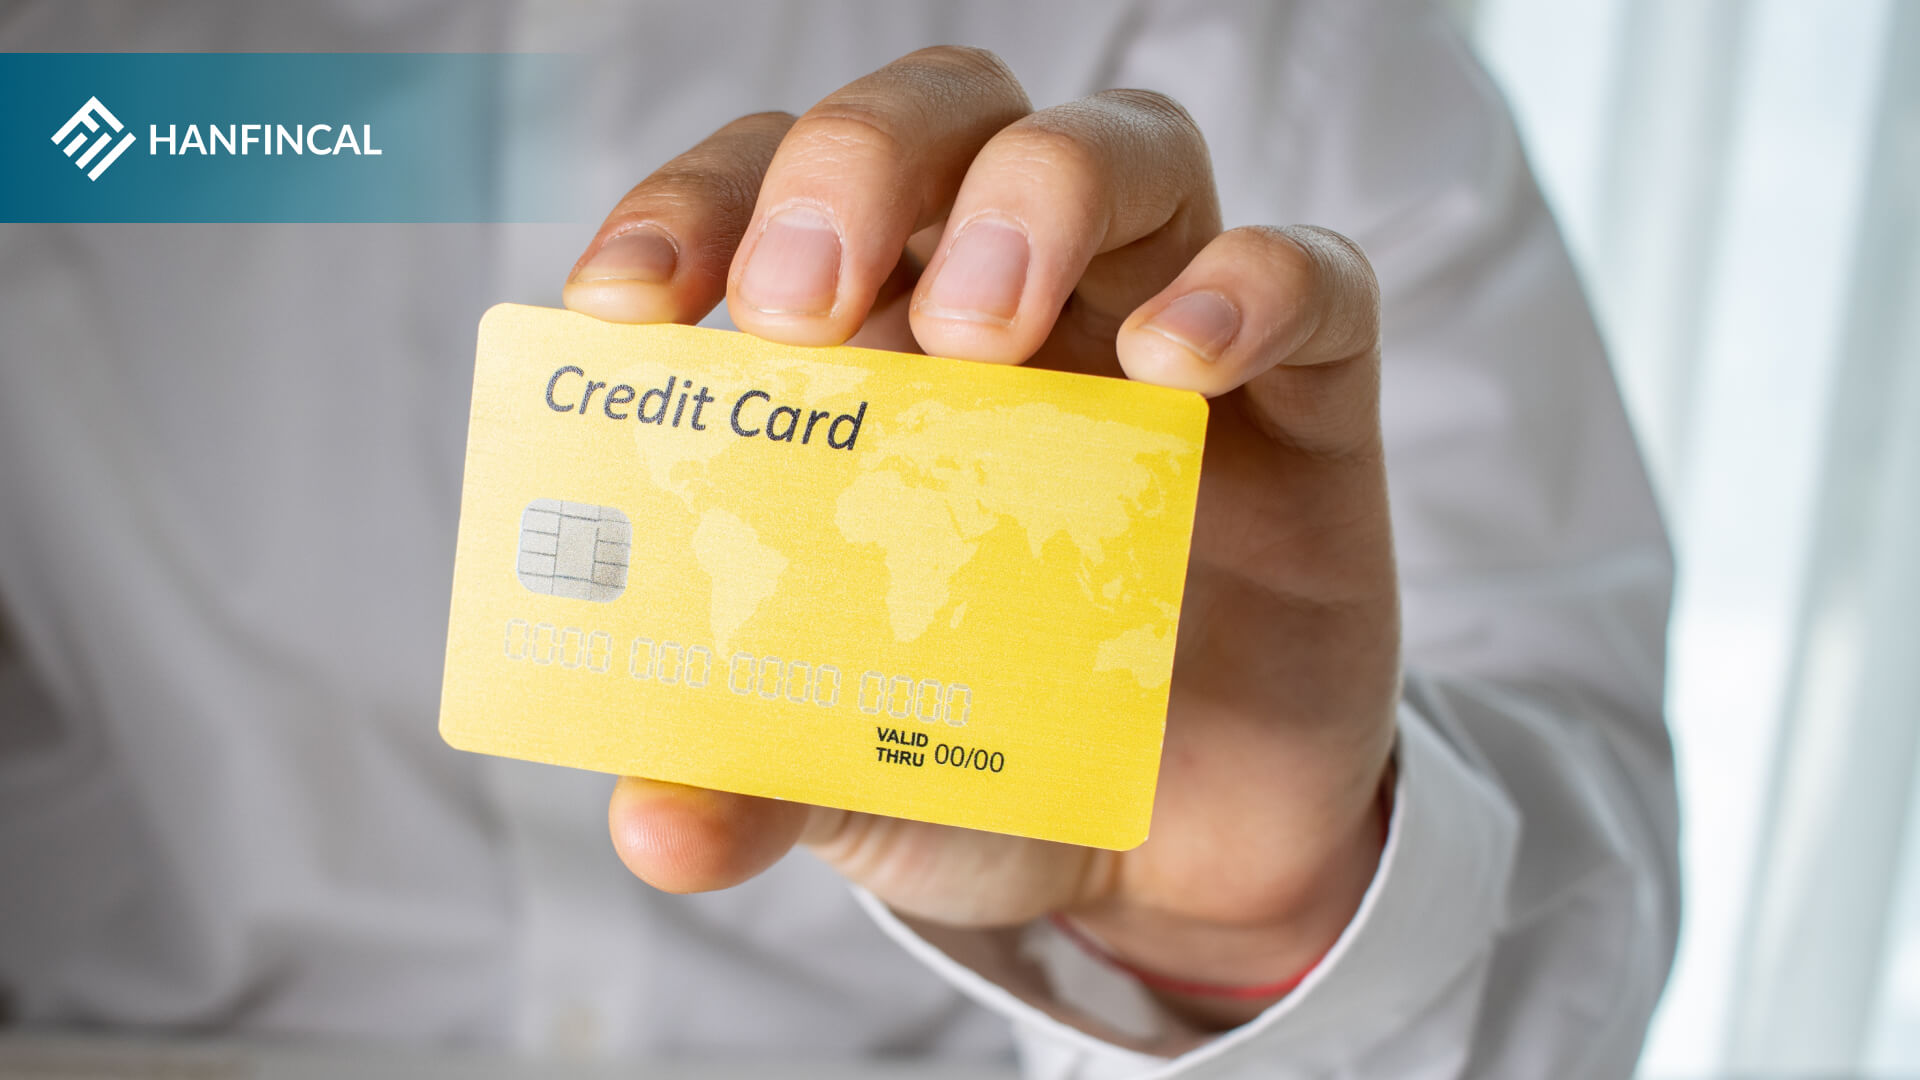 Credit card approval requirements